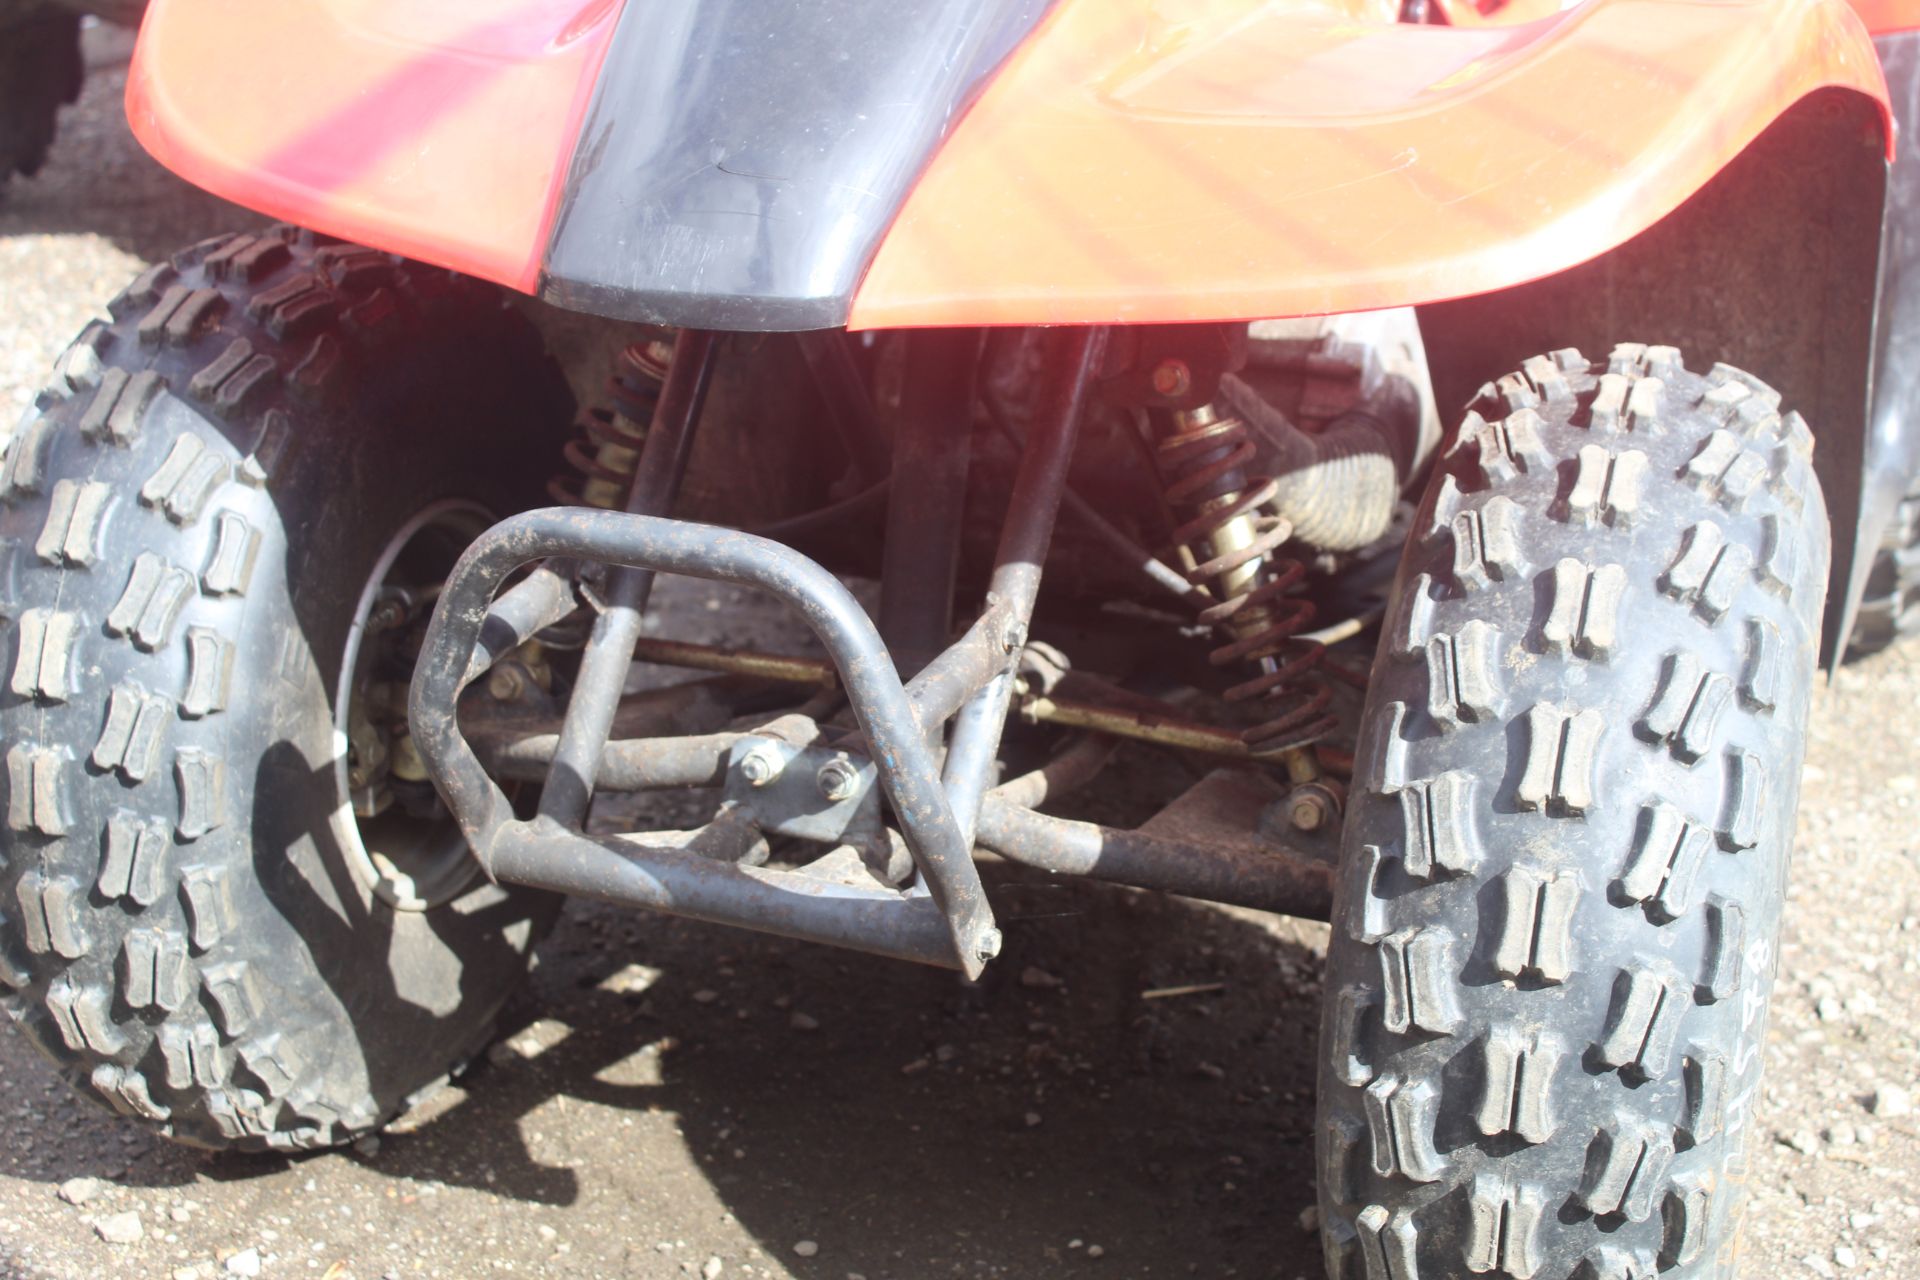 Kymco MX'er 150cc off road ATV. 2004. owned from new. Key, Manual held. - Image 18 of 18